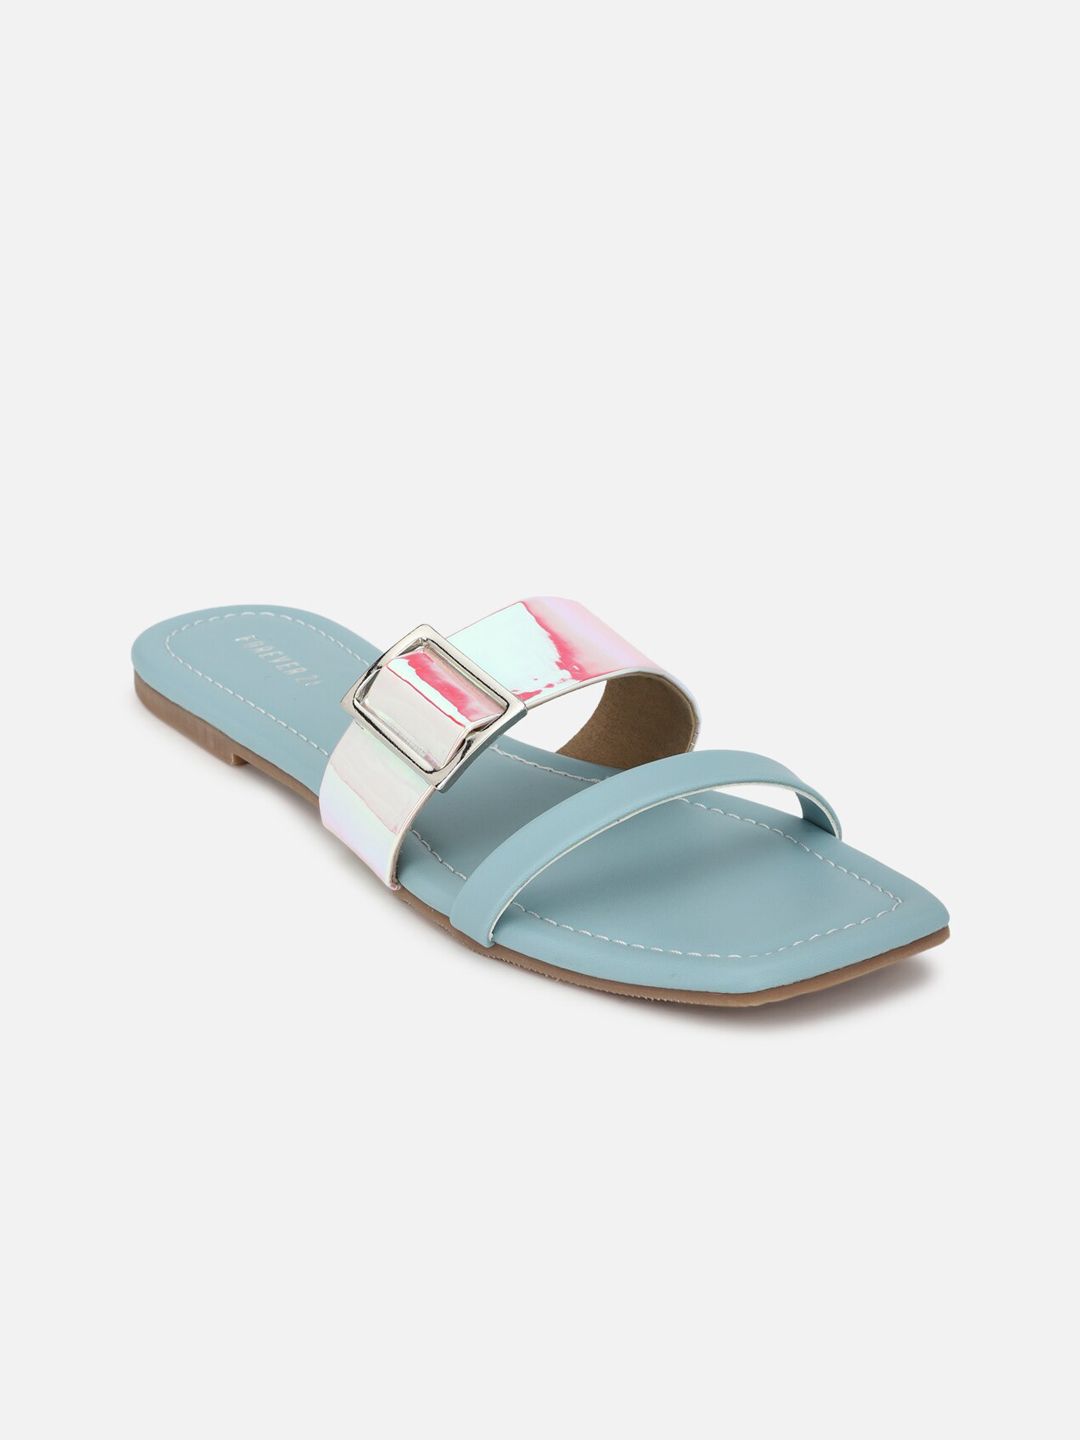 FOREVER 21 Women Blue Colourblocked Open Toe Flats with Buckles Price in India